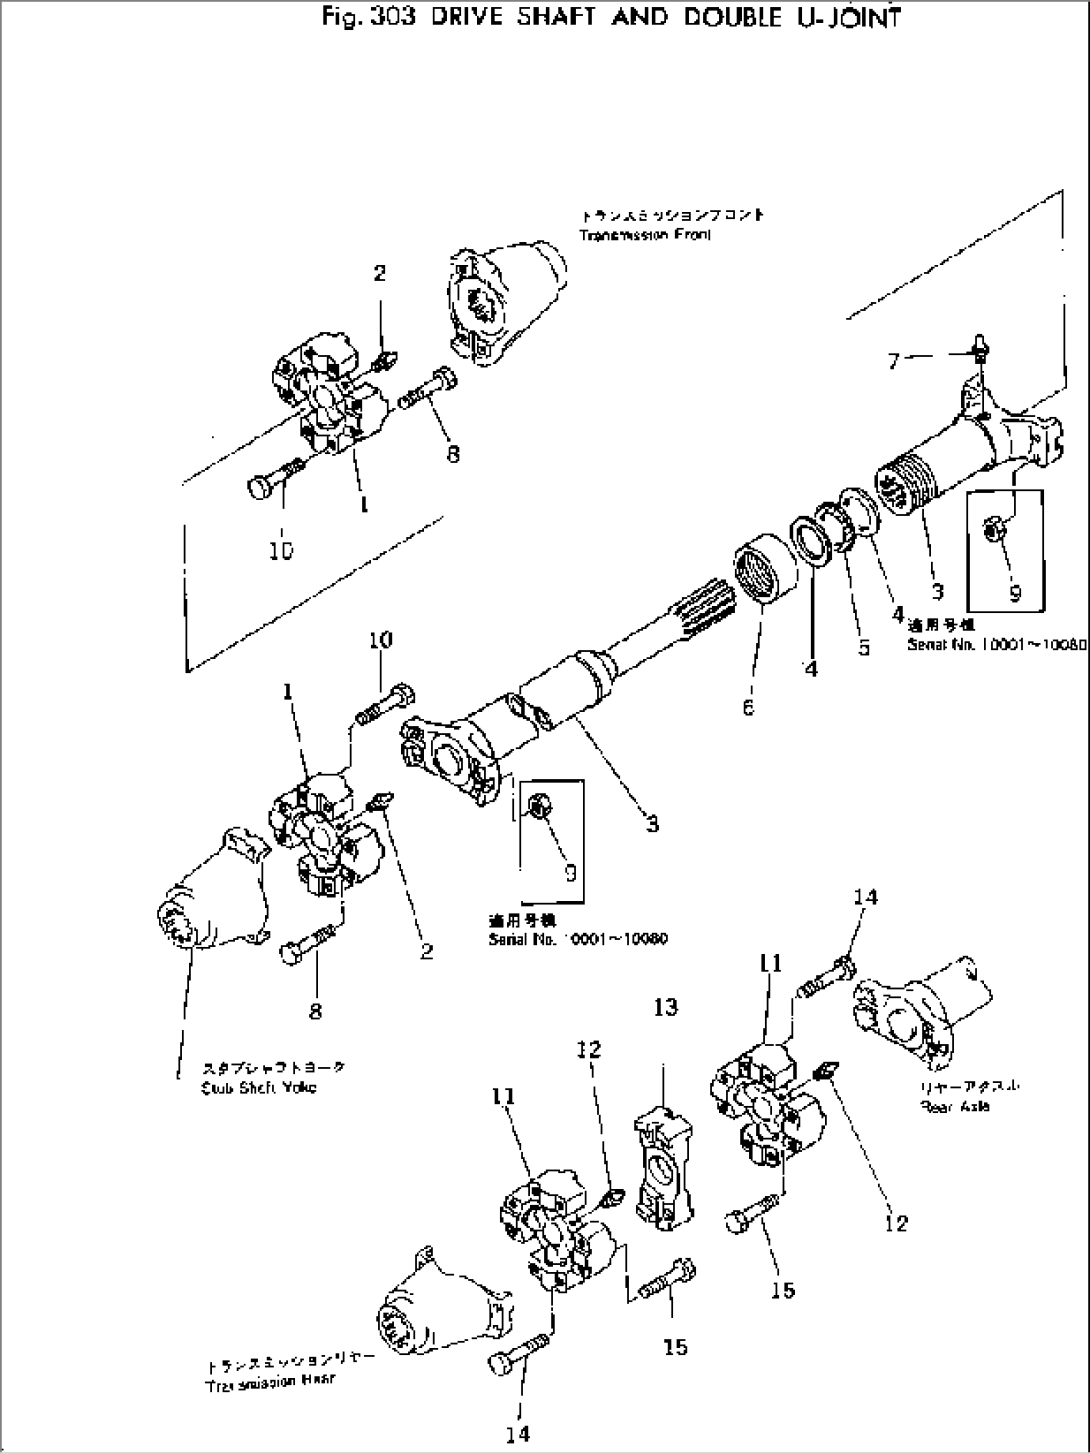 DRIVE SHAFT AND DOUBLE U-JOINT